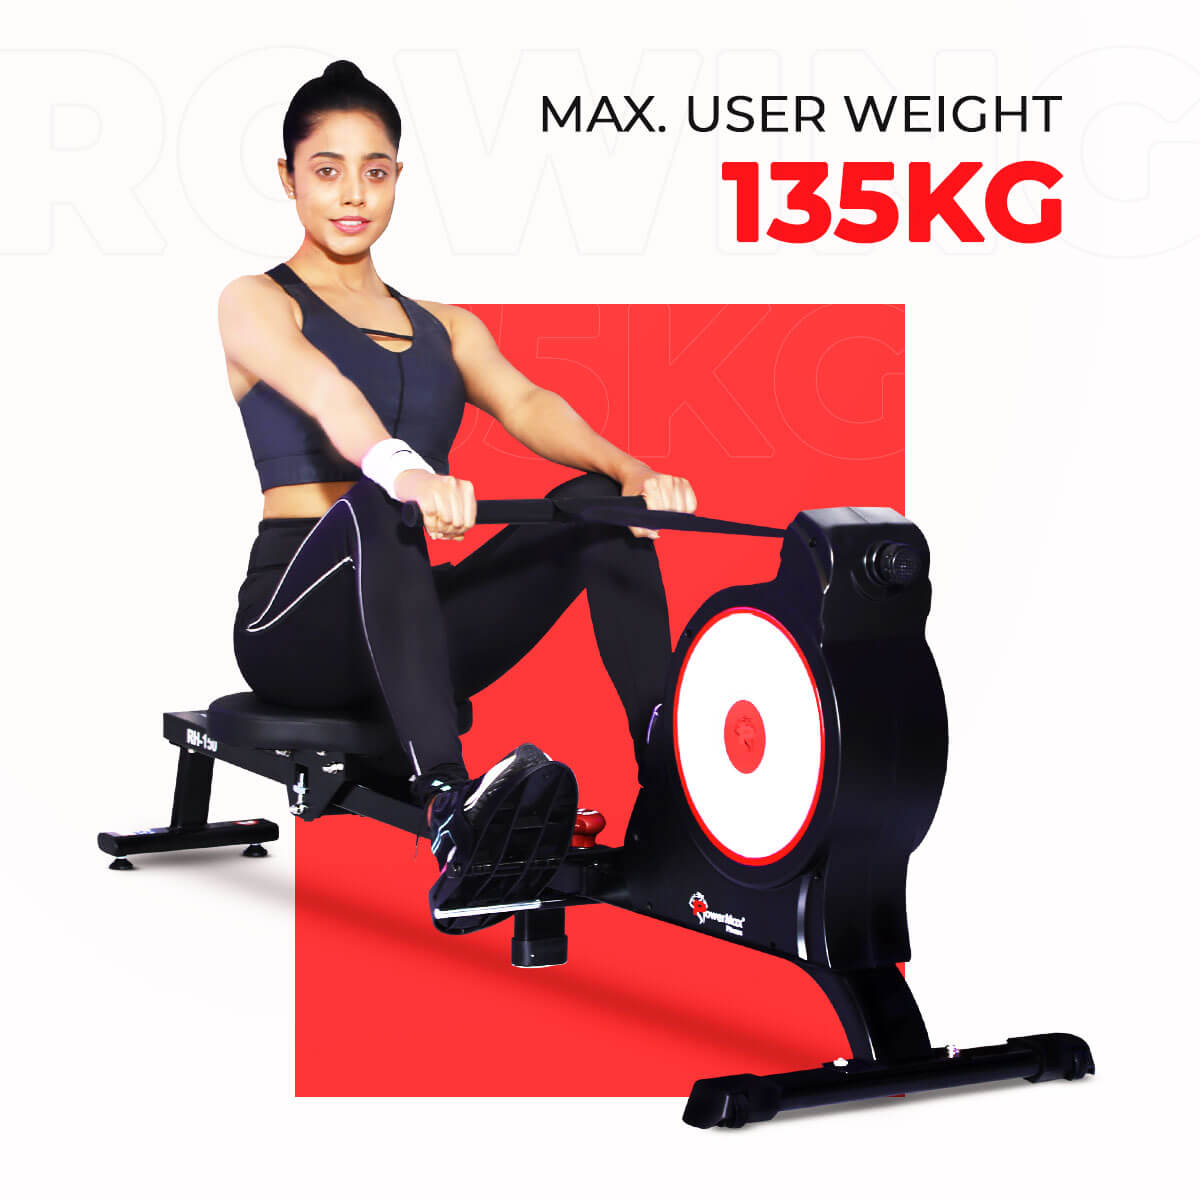 buy powermax fitness rh-150 magnetic foldable rowing machine for home use